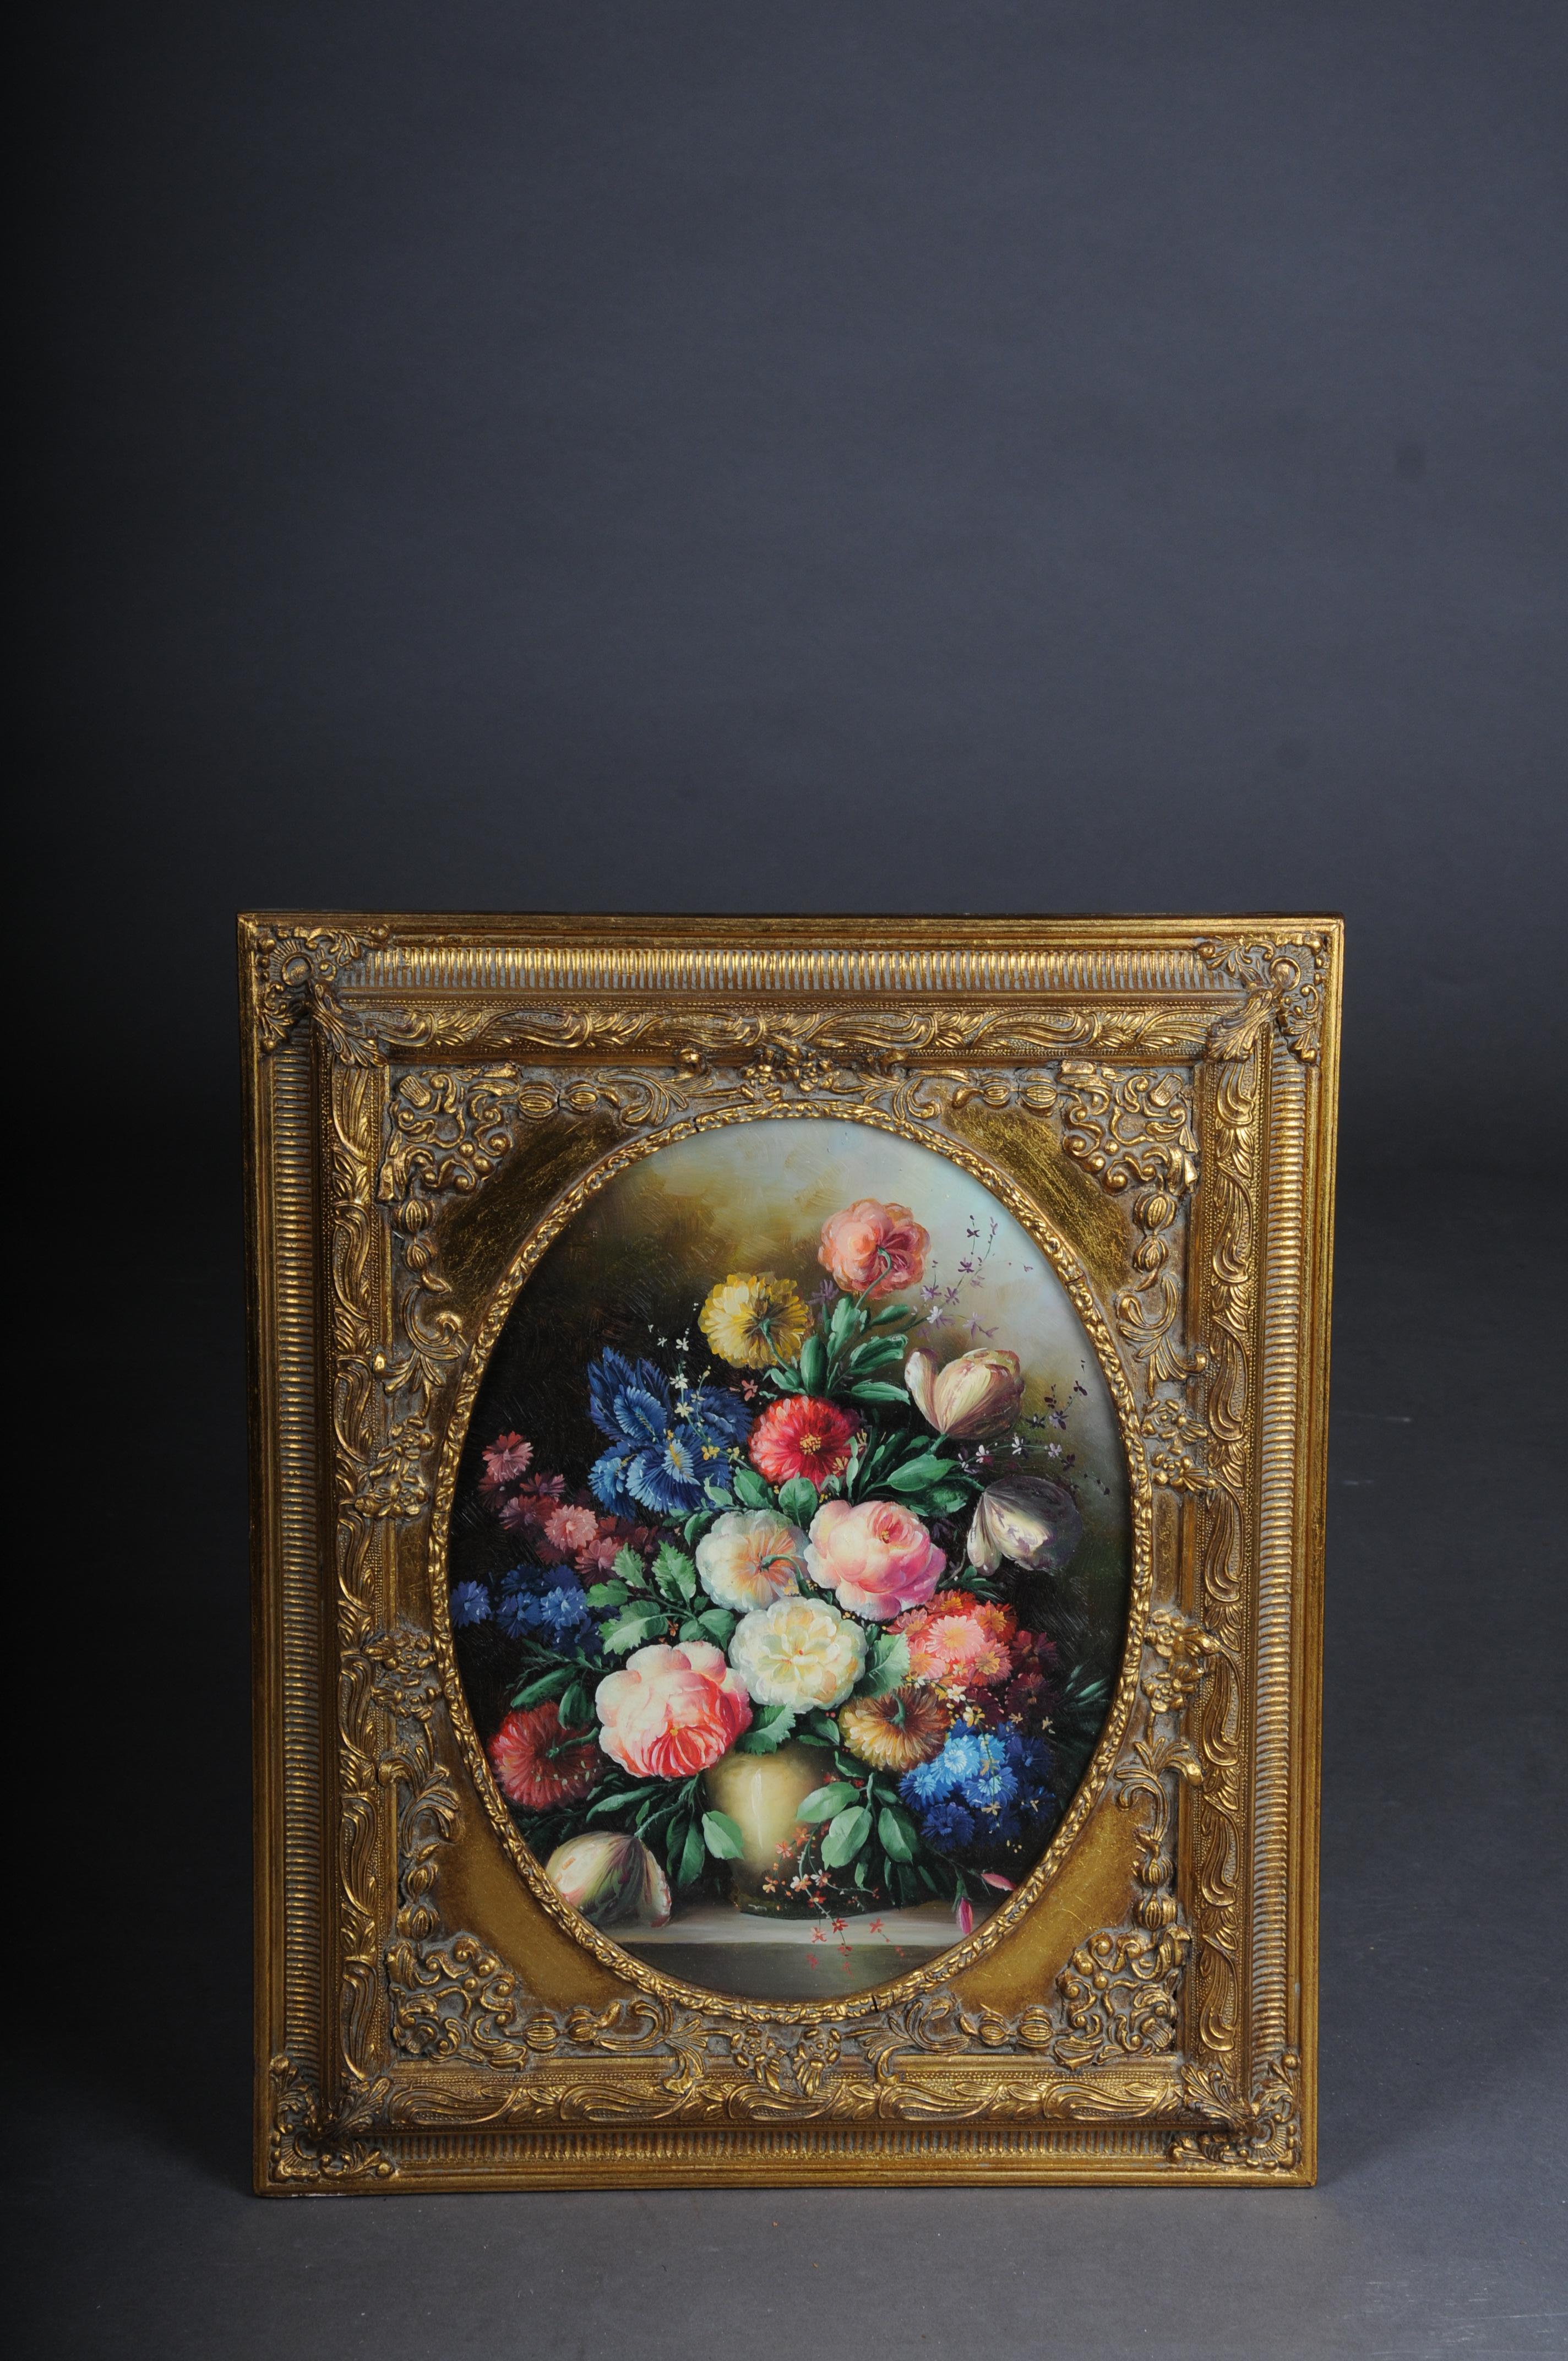 20th Century Oil Painting Still Life

Oil on panel still life, richly painted with lavish and luxuriant flowers.

Painting framed in an oval ornate and gilded wooden frame. Very decorative.